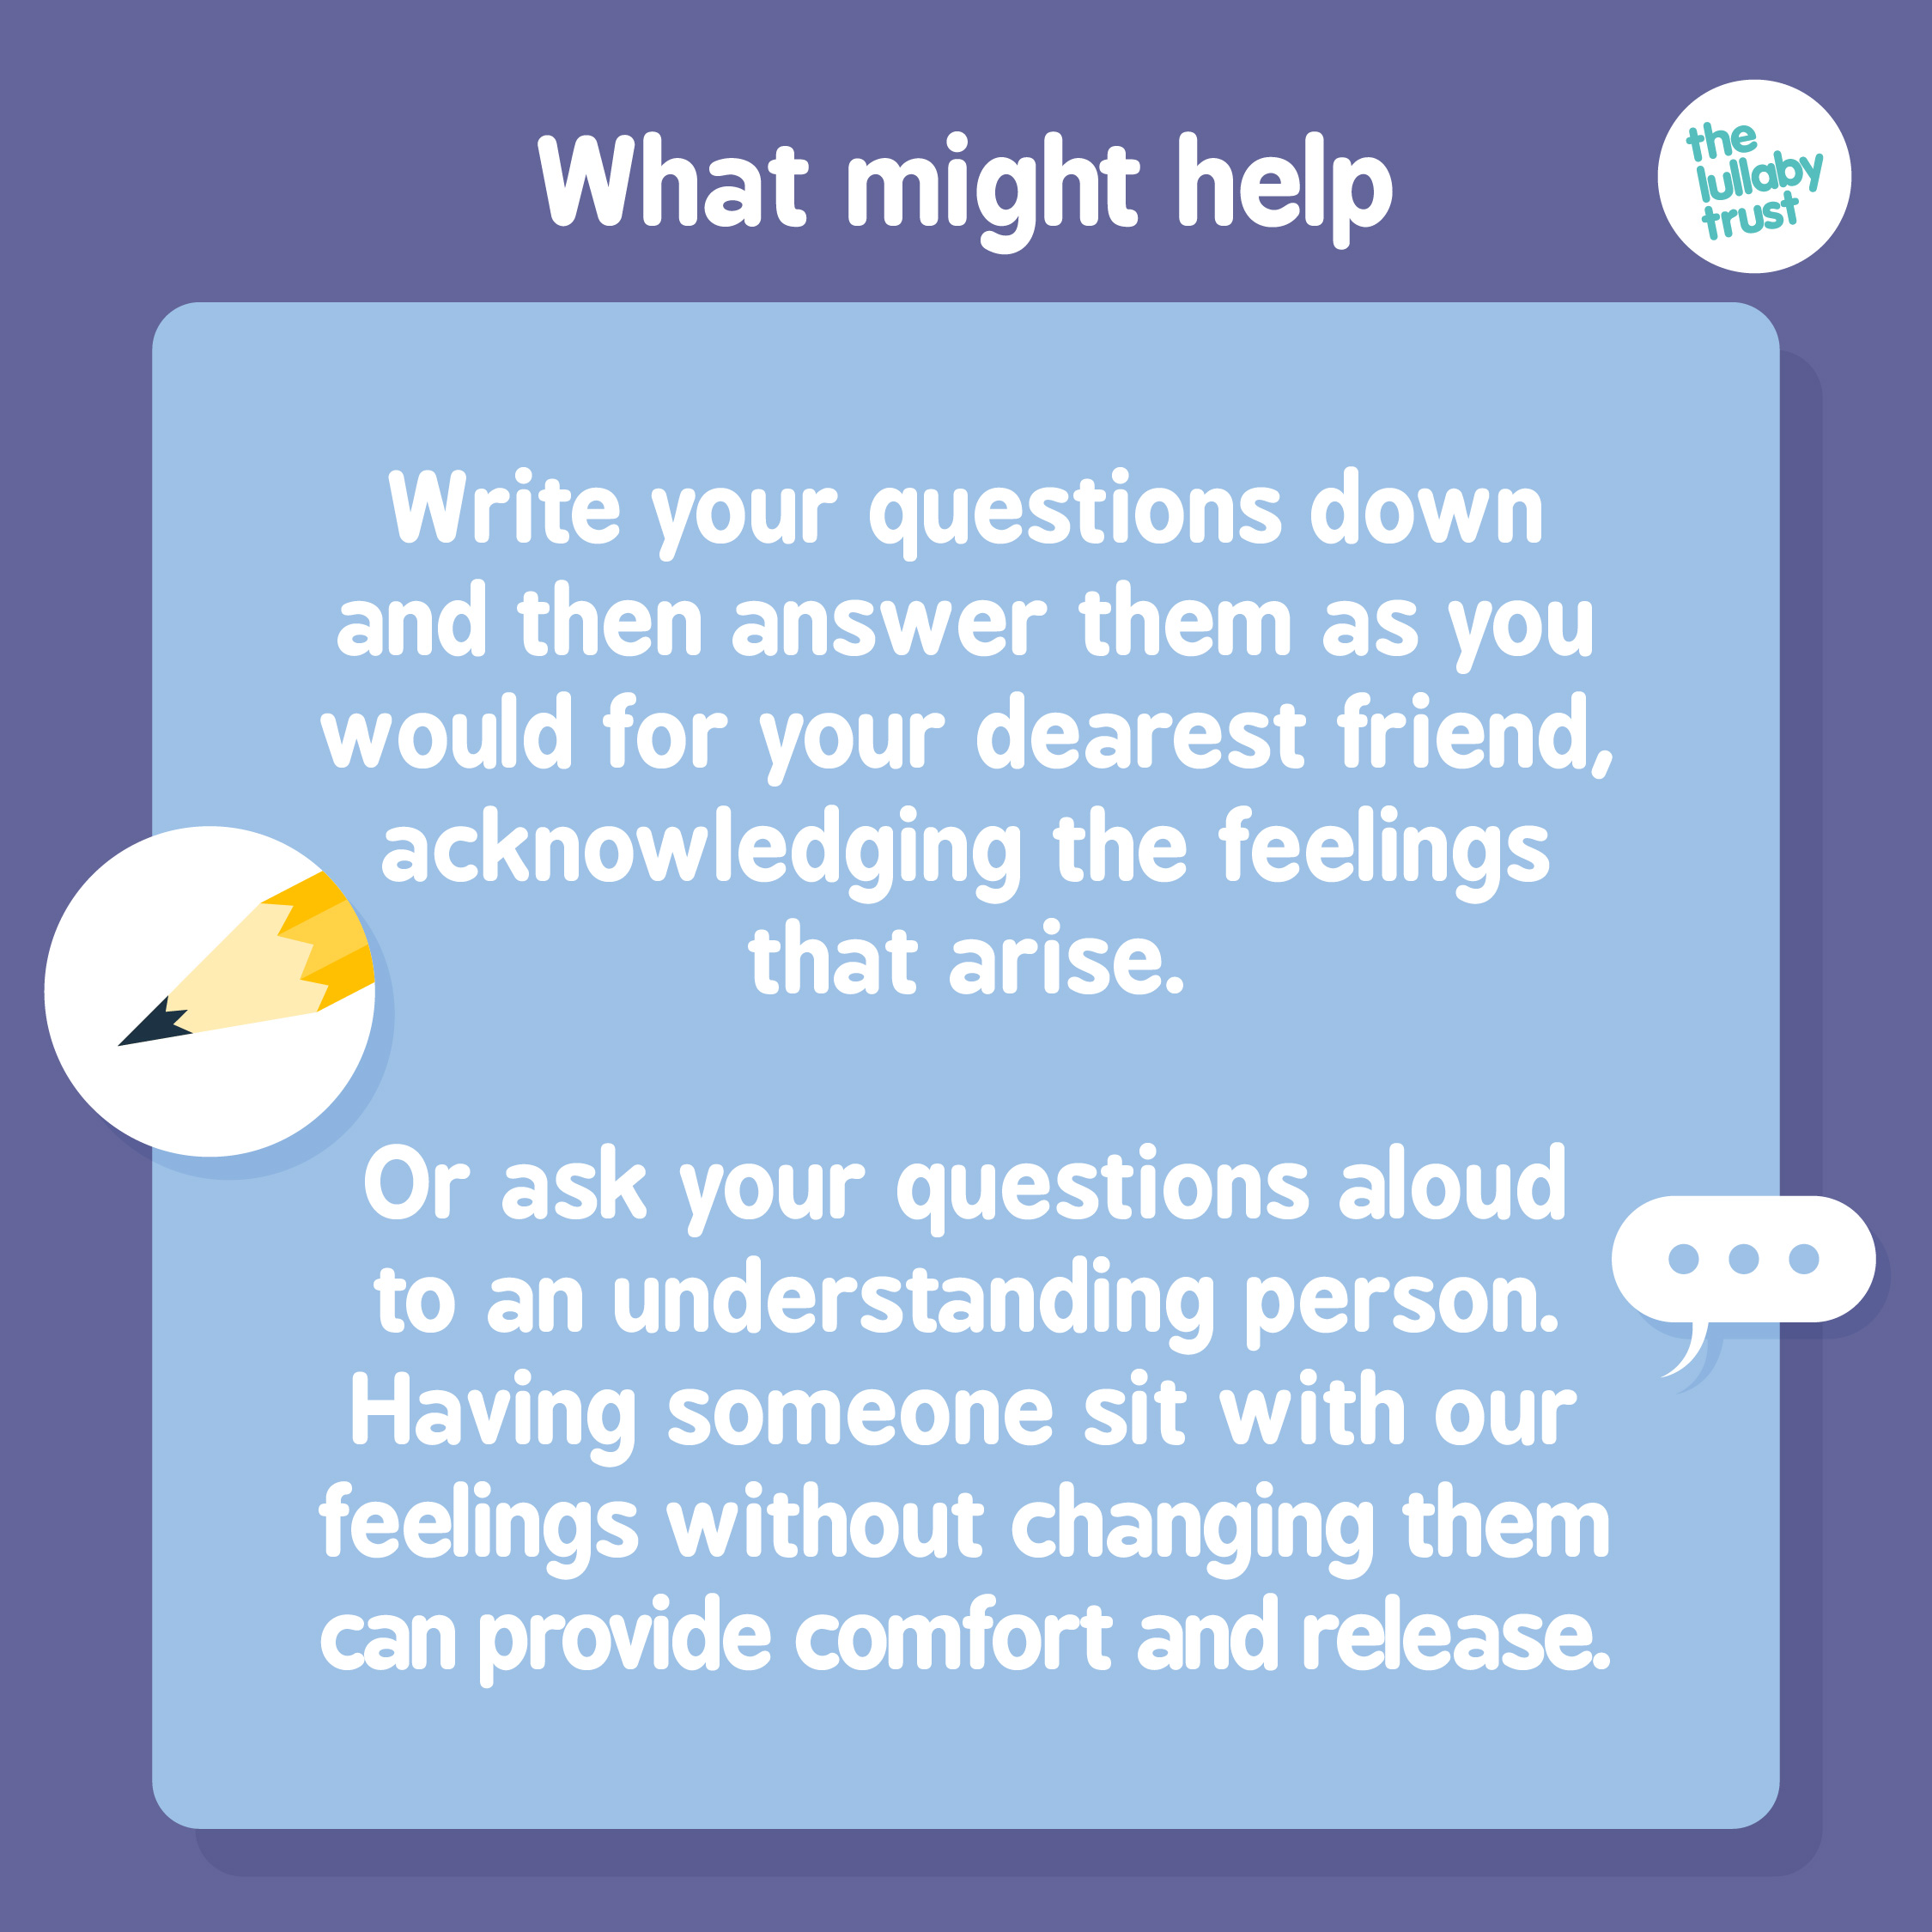 What might help: Write your questions down and then answer them as you would for your dearest friend, acknowledging the feelings that arise. Or ask your questions aloud to an understanding person. Having someone sit with our feelings without changing them can provide comfort and release